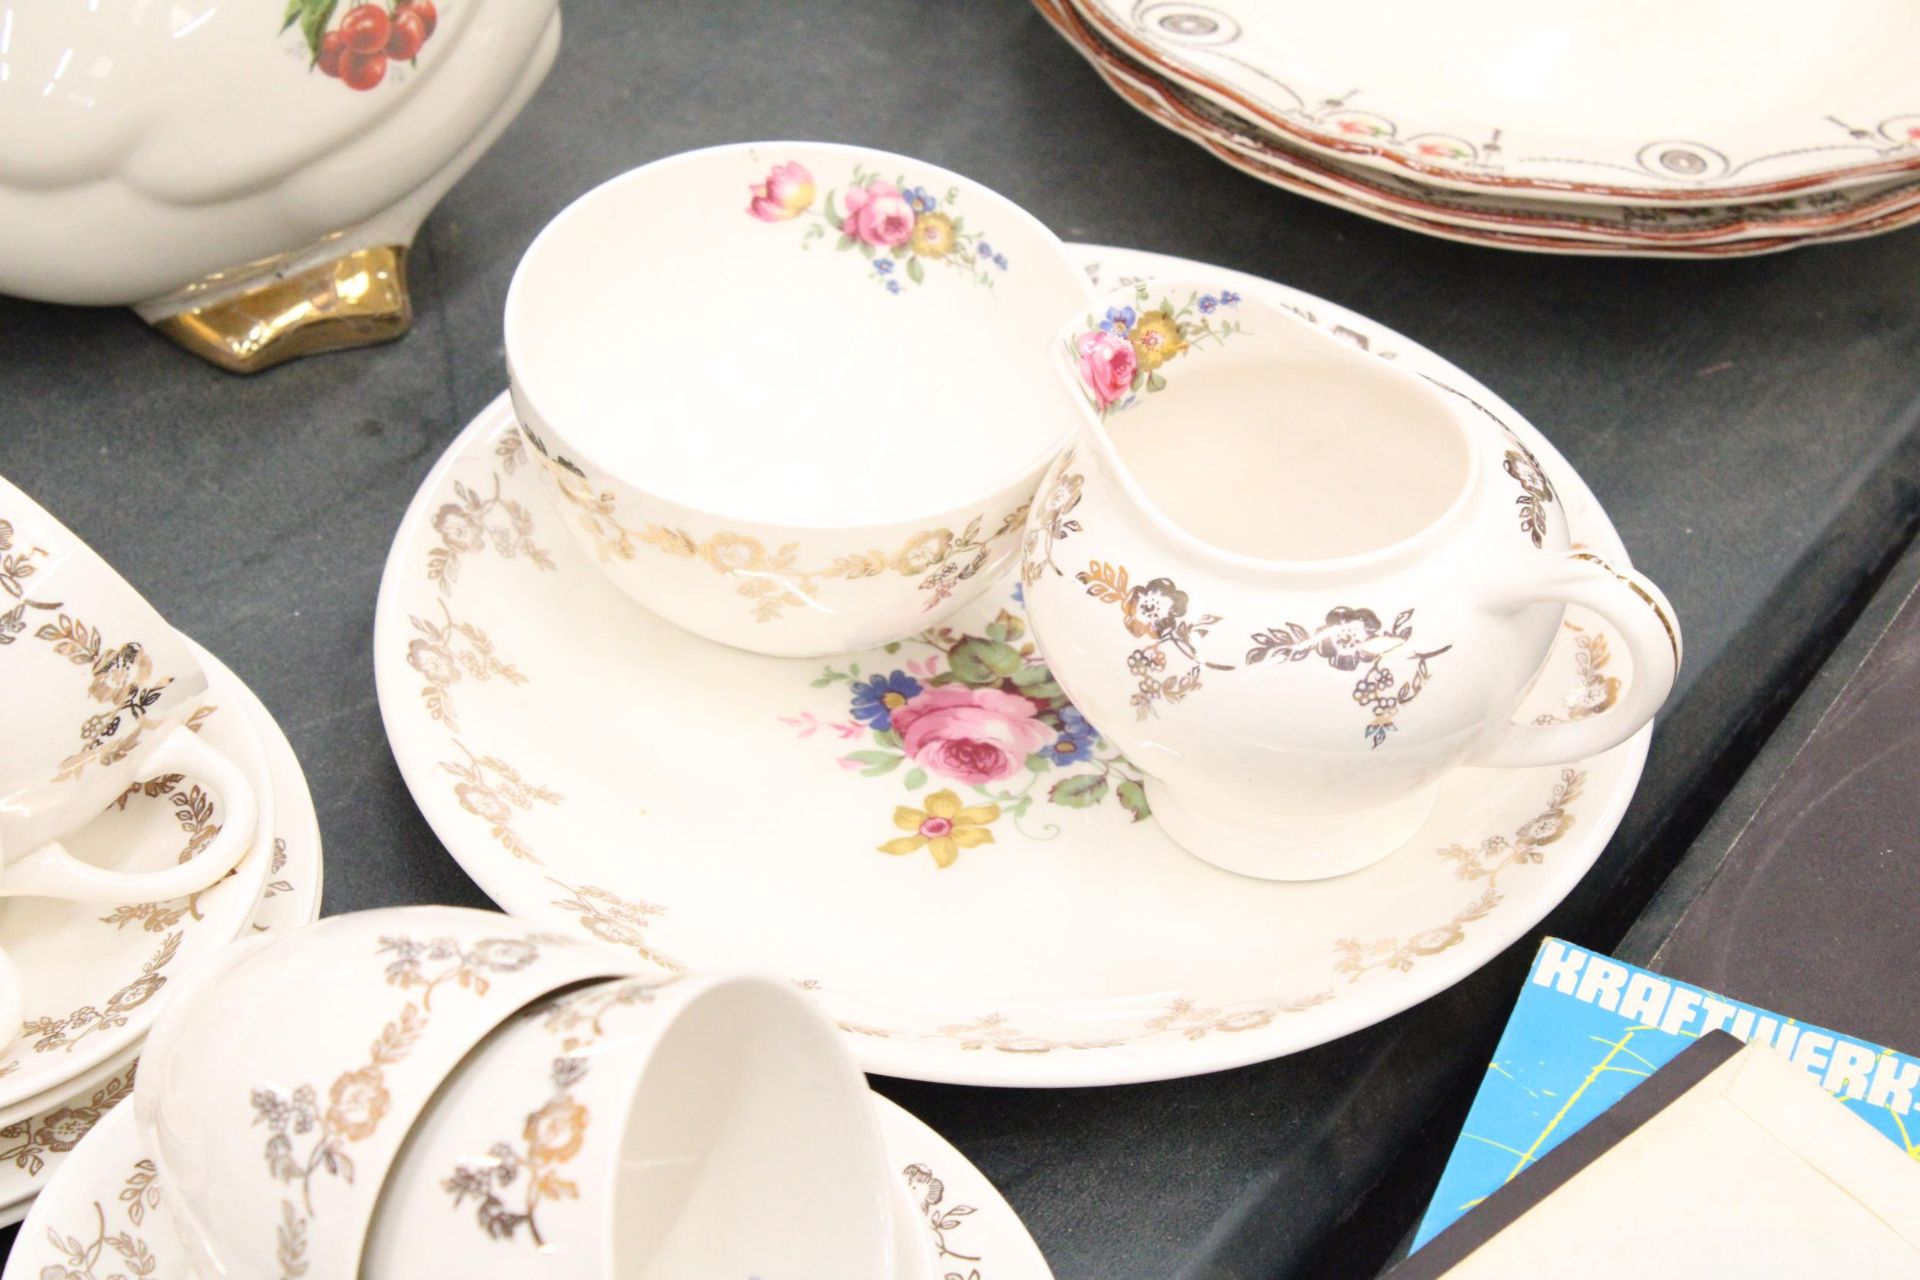 A QUANTITY OF VINTAGE TEAWARE TO INCLUDE, EMPIRE, CAKE PLATE, SUGAR BOWL, CREAM JUG, CUPS, SAUCERS - Image 4 of 5